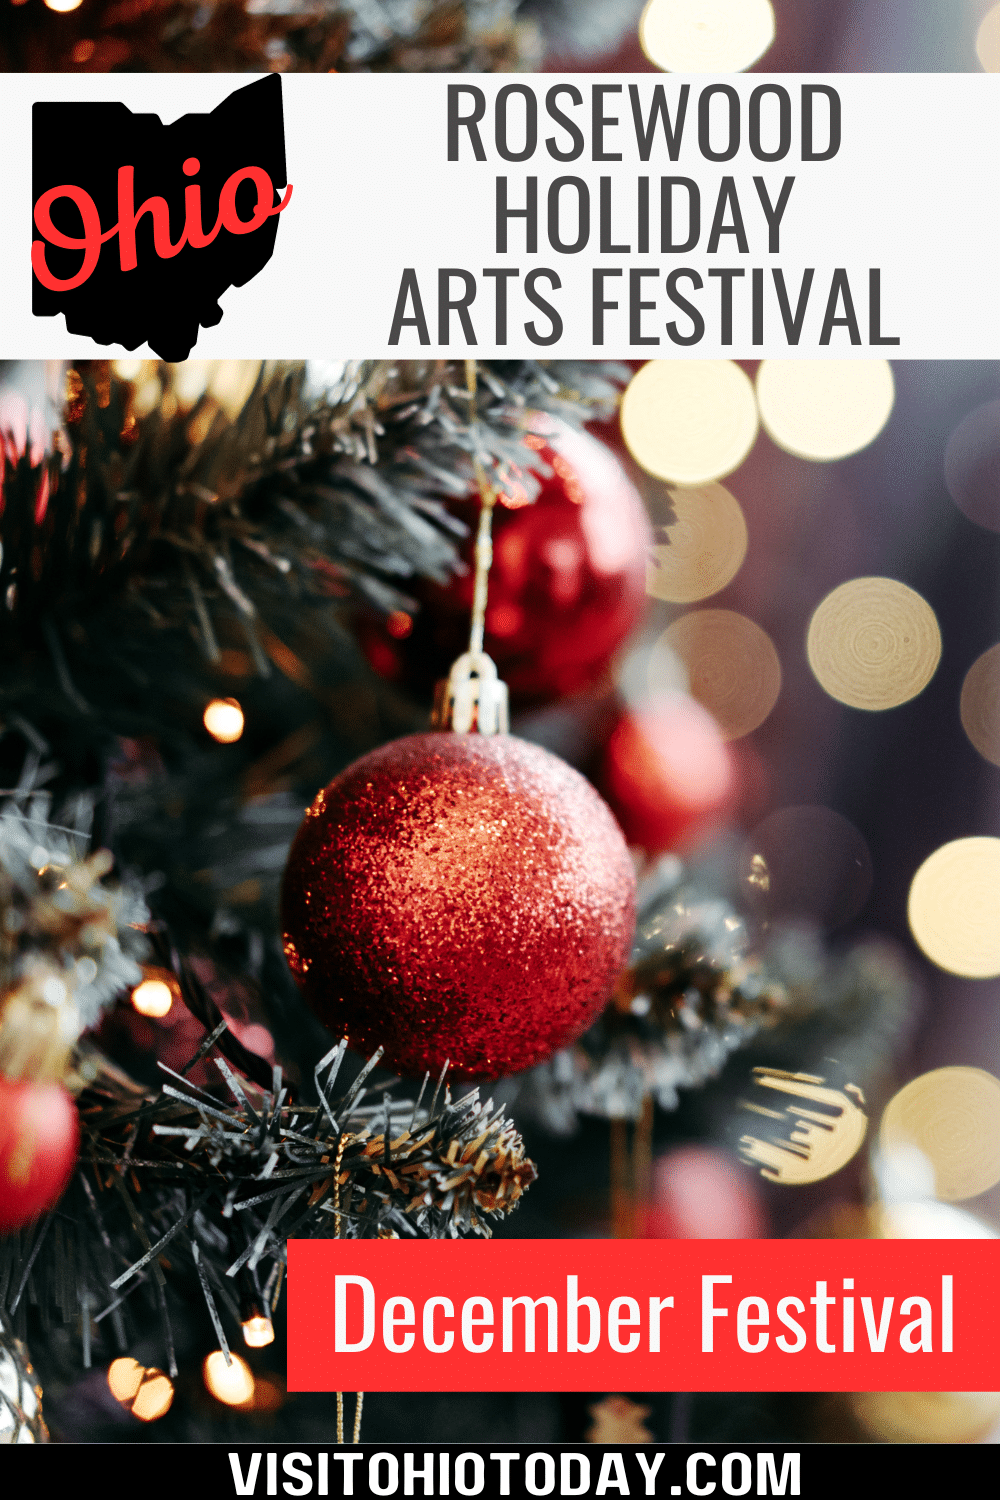 Rosewood Holiday Arts Festival takes place at the Rosewood Arts Center in Kettering on the first Saturday of December. This festival is focused on the talent of local artists.